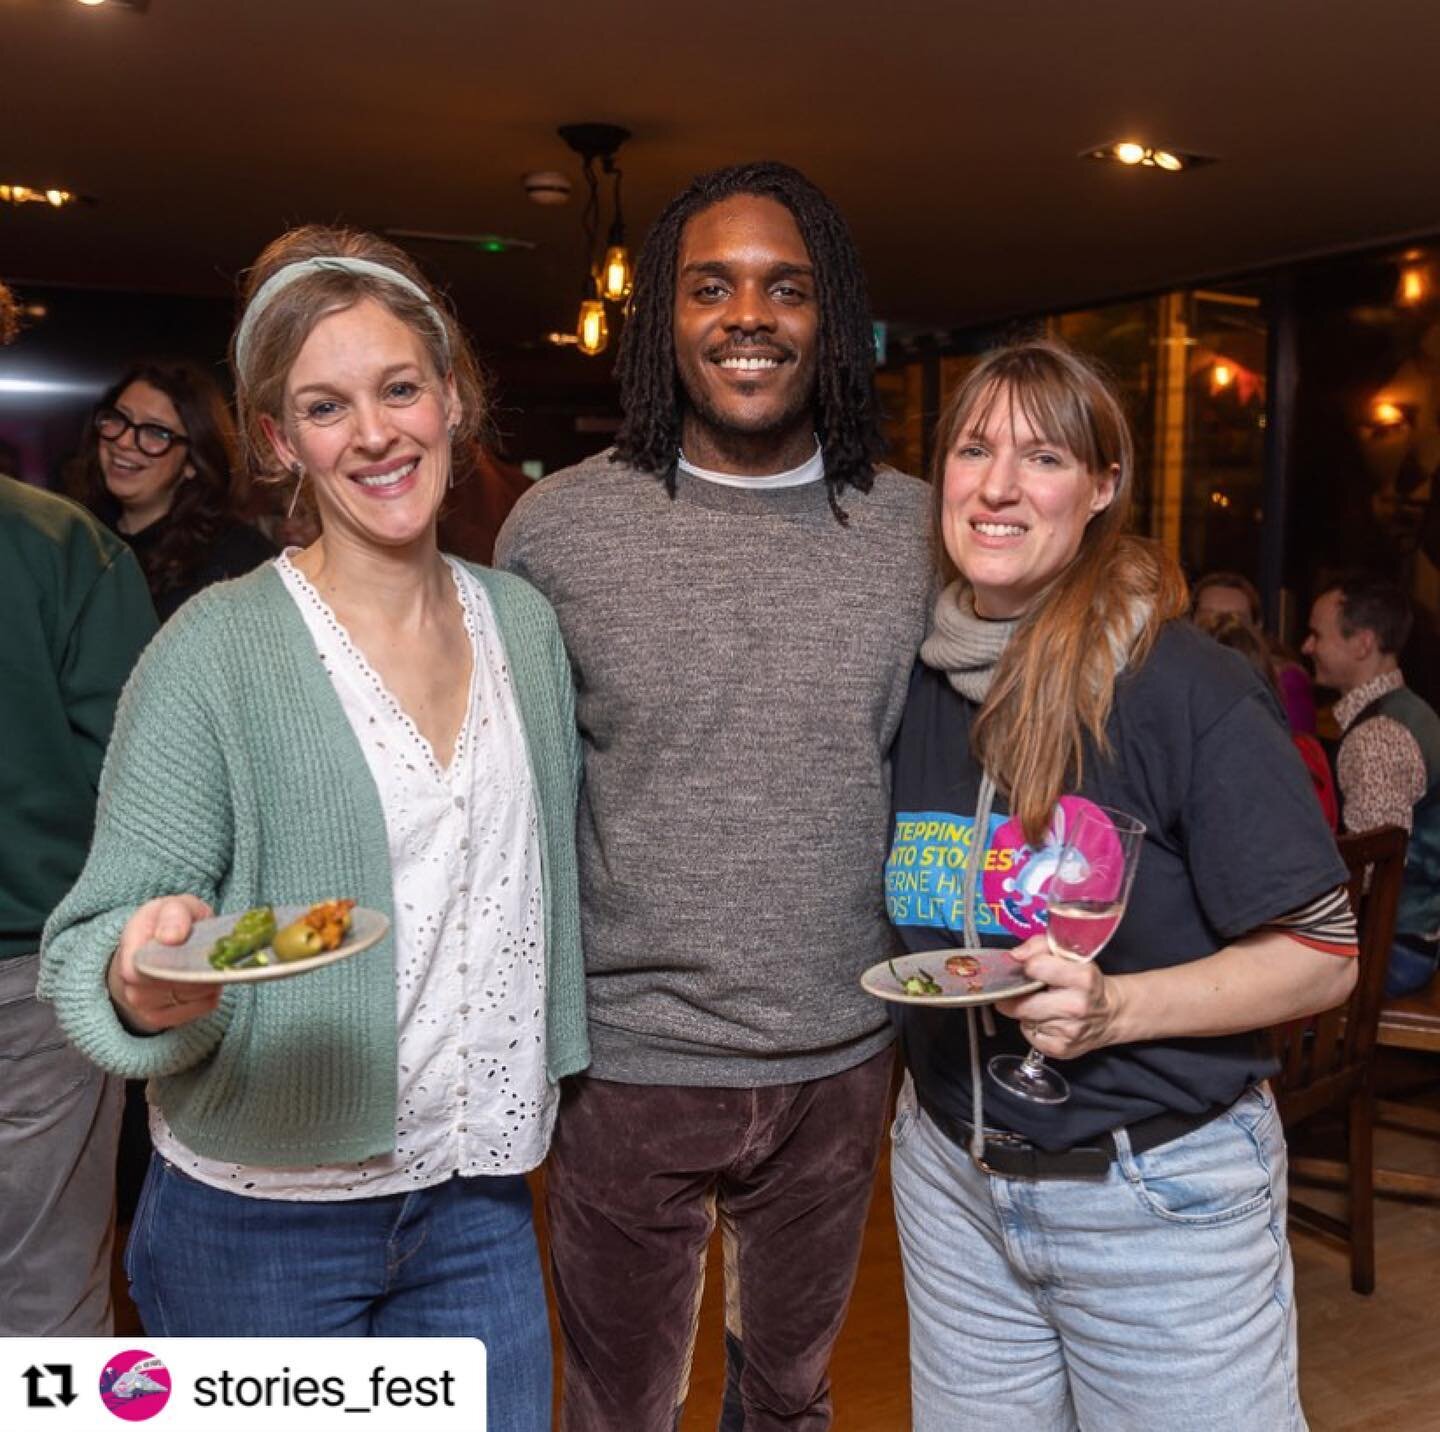 Such a pleasure getting together with these fab and lovely #childrensbook creators @stories_fest Festival Drinks💕📚🥂🙌 #bookcommunity #nightout!

#Repost @stories_fest 
・・・
Lots of bookish fun with this gang of brilliant #childrensbook authors &amp